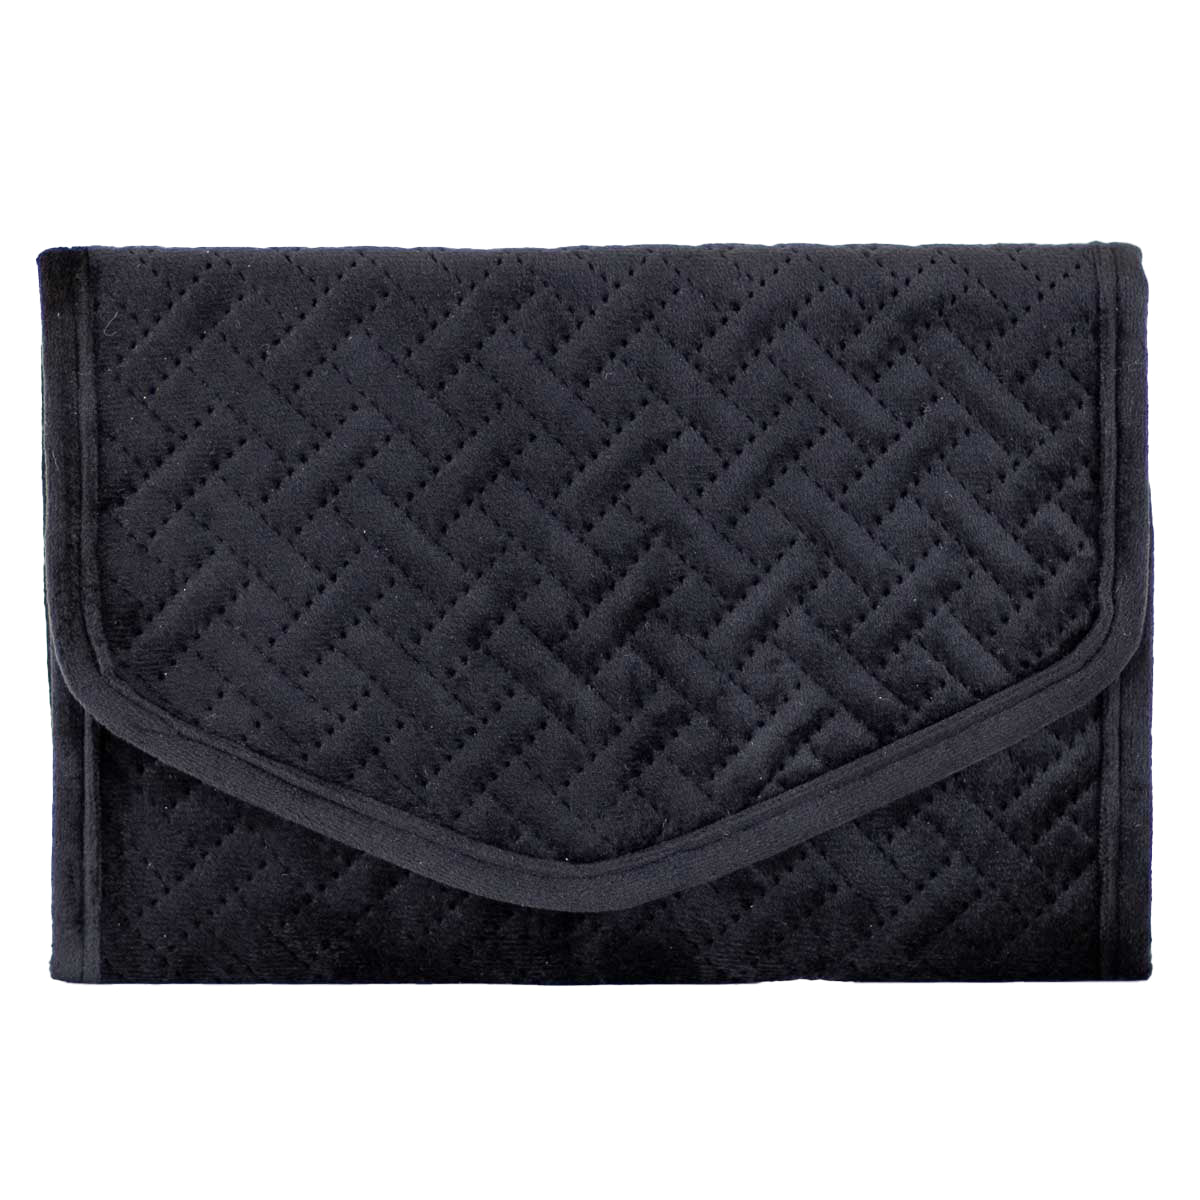 Velvet Quilted Jewelry Clutch